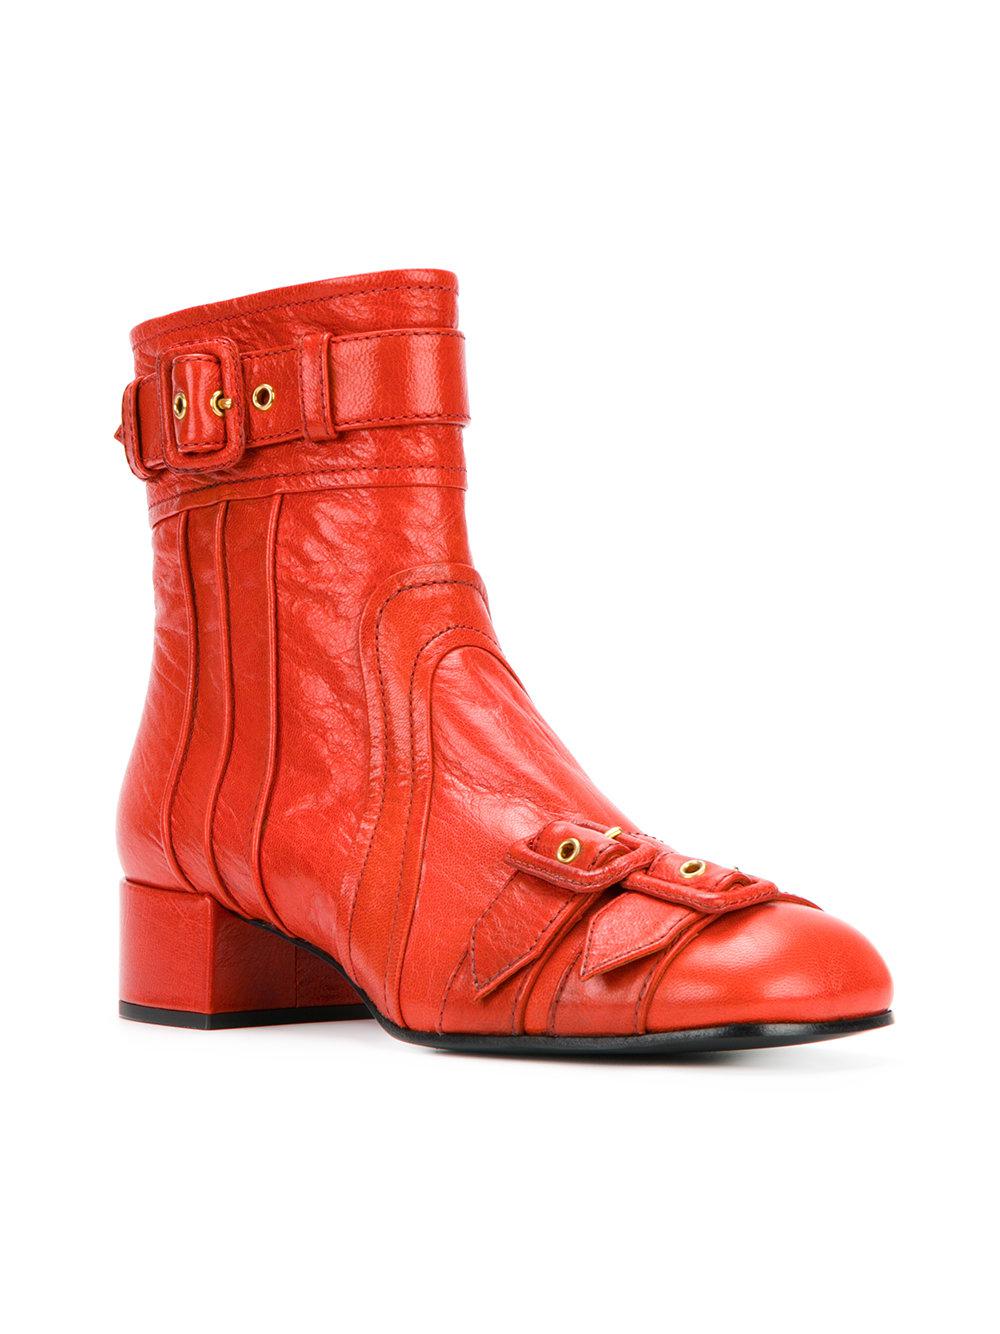 Lyst - Prada Buckled Boots in Red